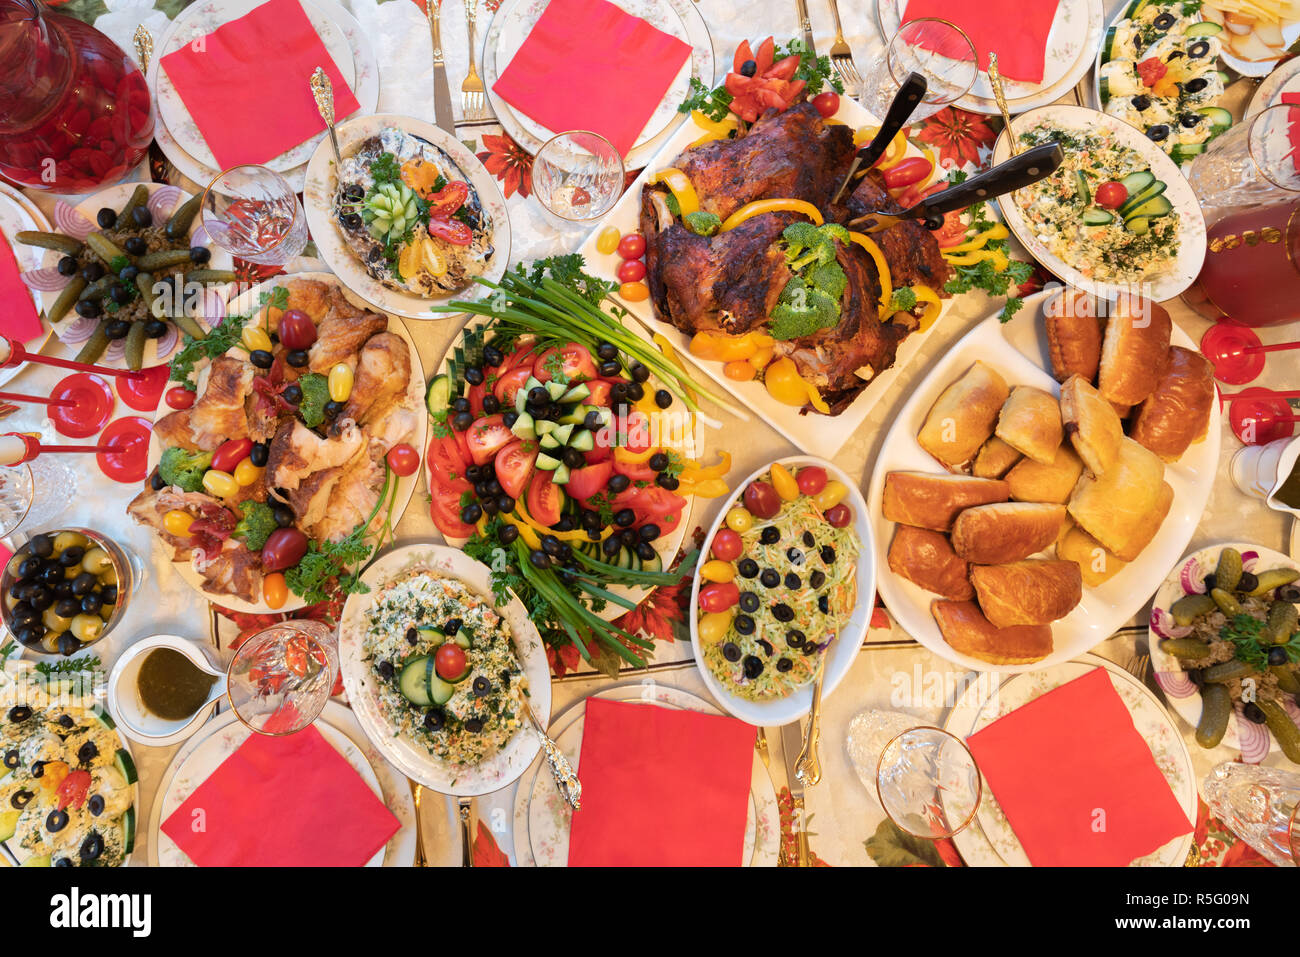 Thanksgiving traditional turkey dinner mixed with eastern European foods and dishes. View from above. Stock Photo